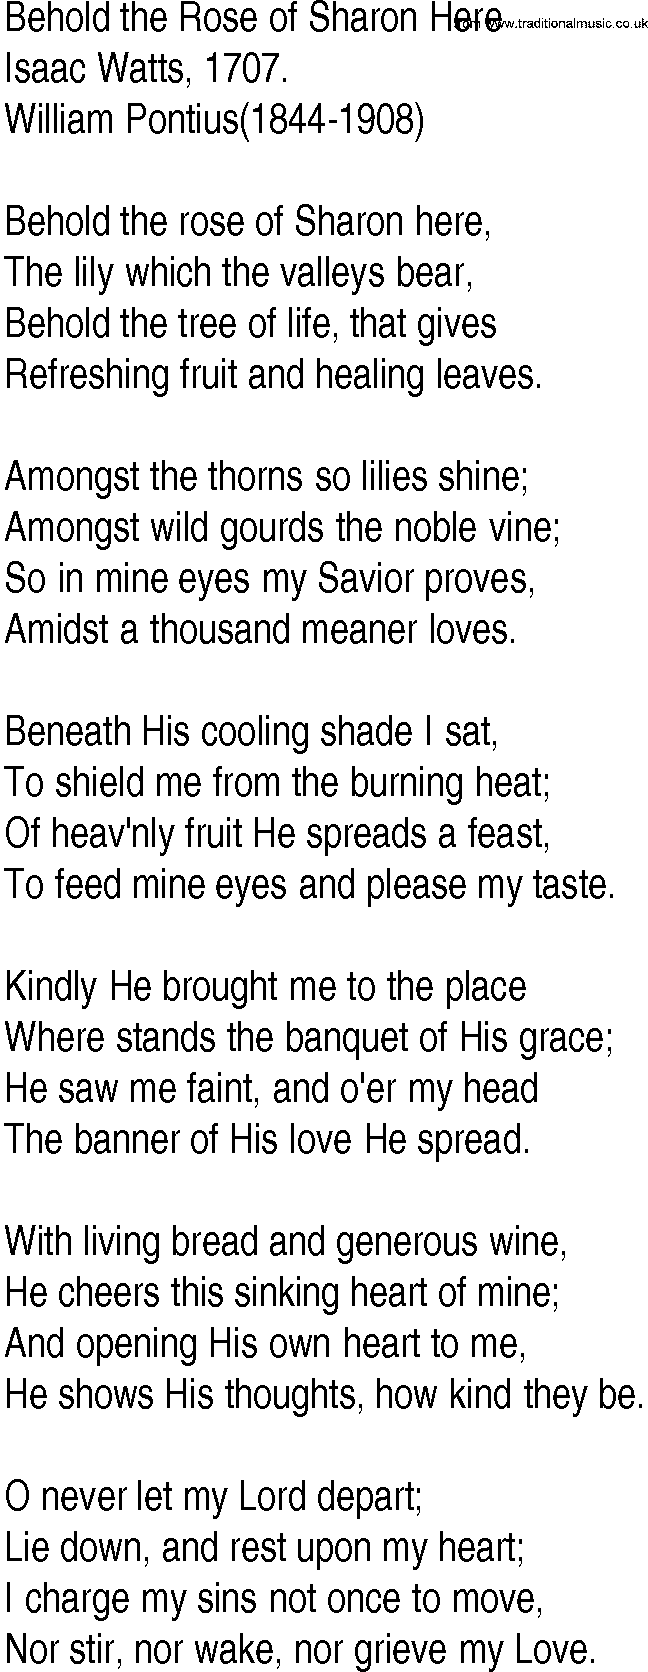 Hymn and Gospel Song: Behold the Rose of Sharon Here by Isaac Watts lyrics